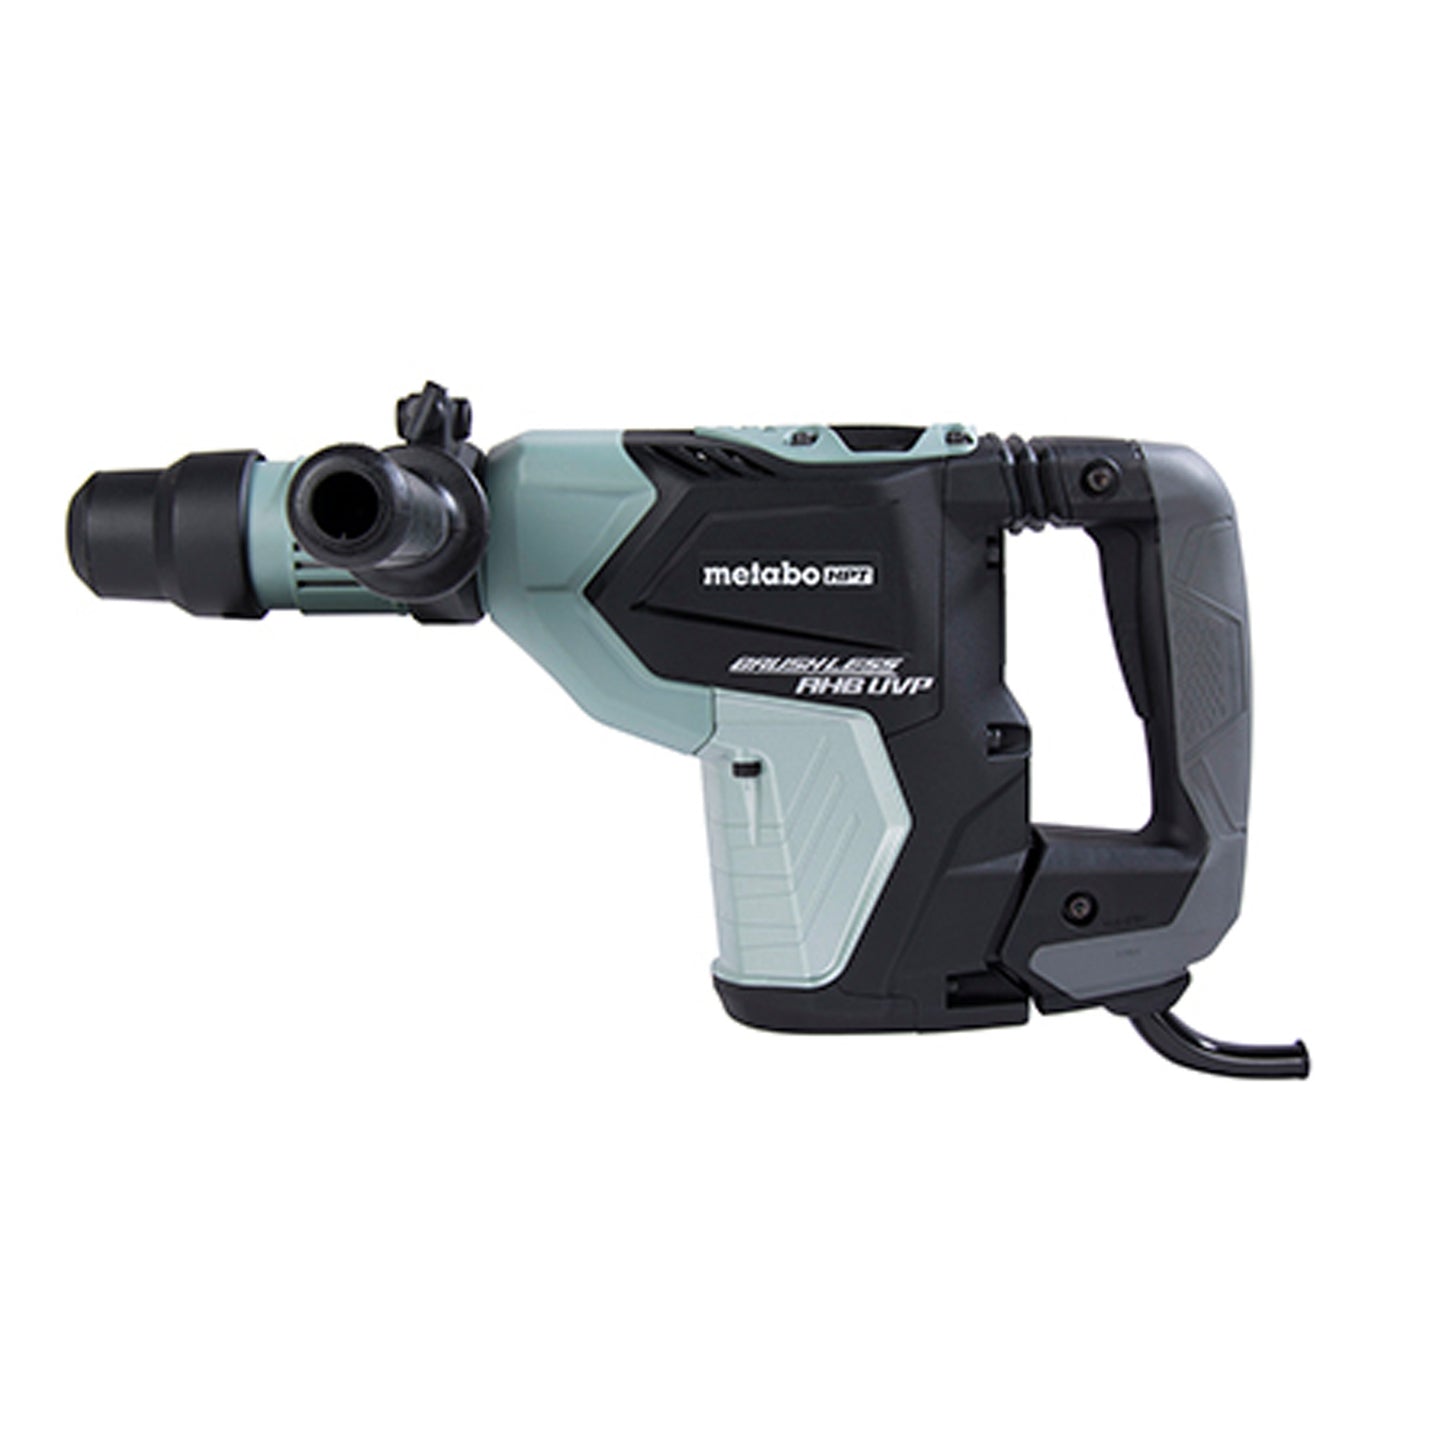 METABO 1 9/16" SDS-MAX Hammer Drill DH40MEY